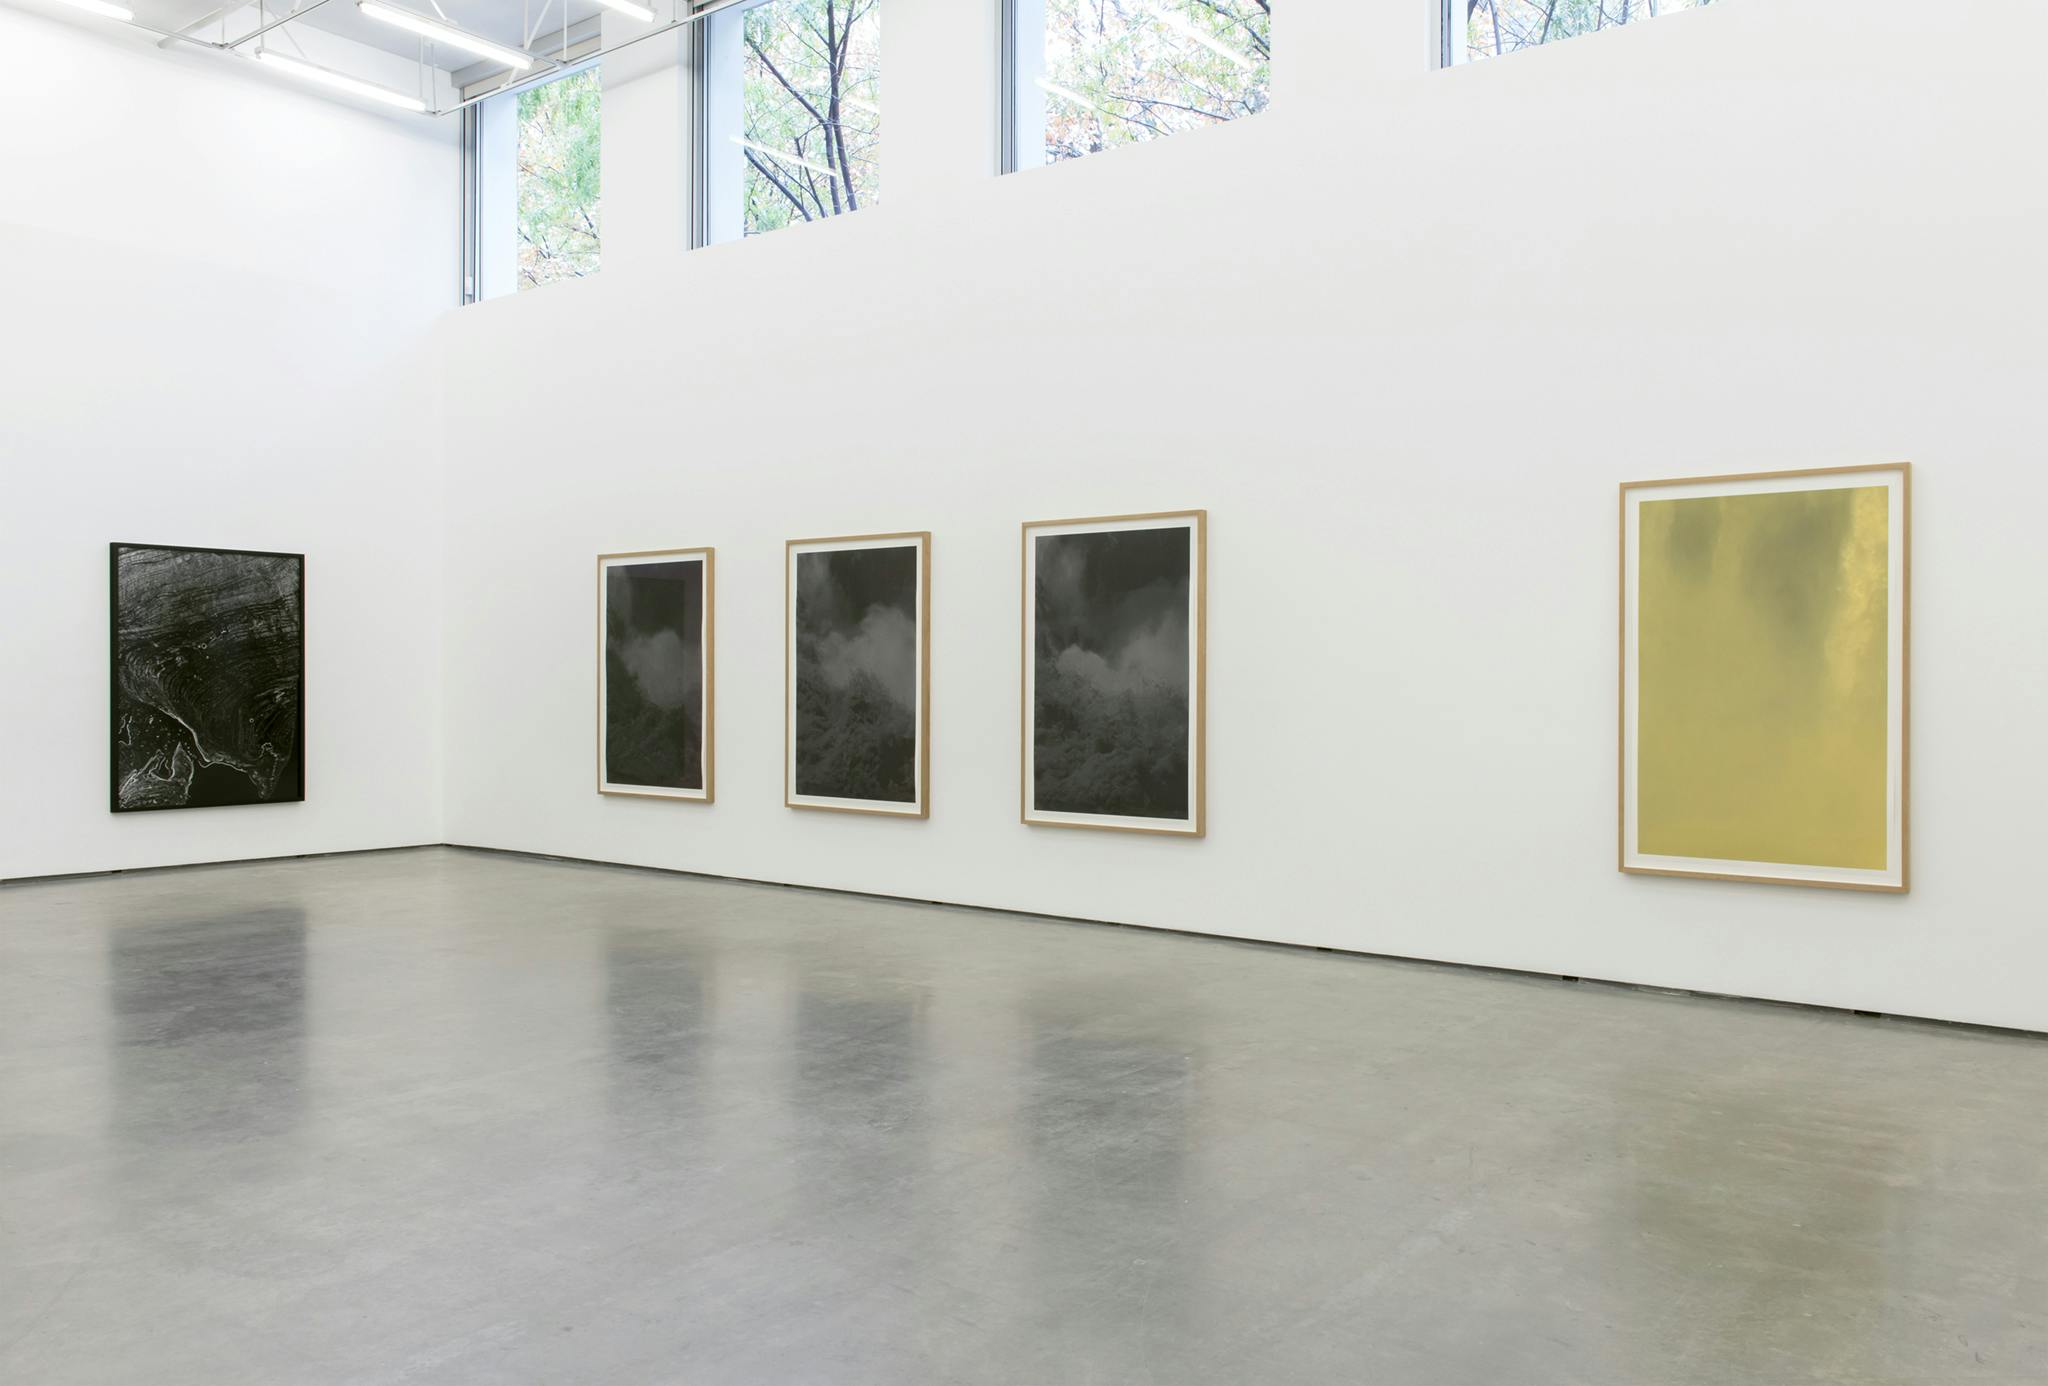 Five large-scale framed photographic prints hang on the wall of a gallery space. The images are all abstract, three of them are in black and white and one shows hues of yellow.